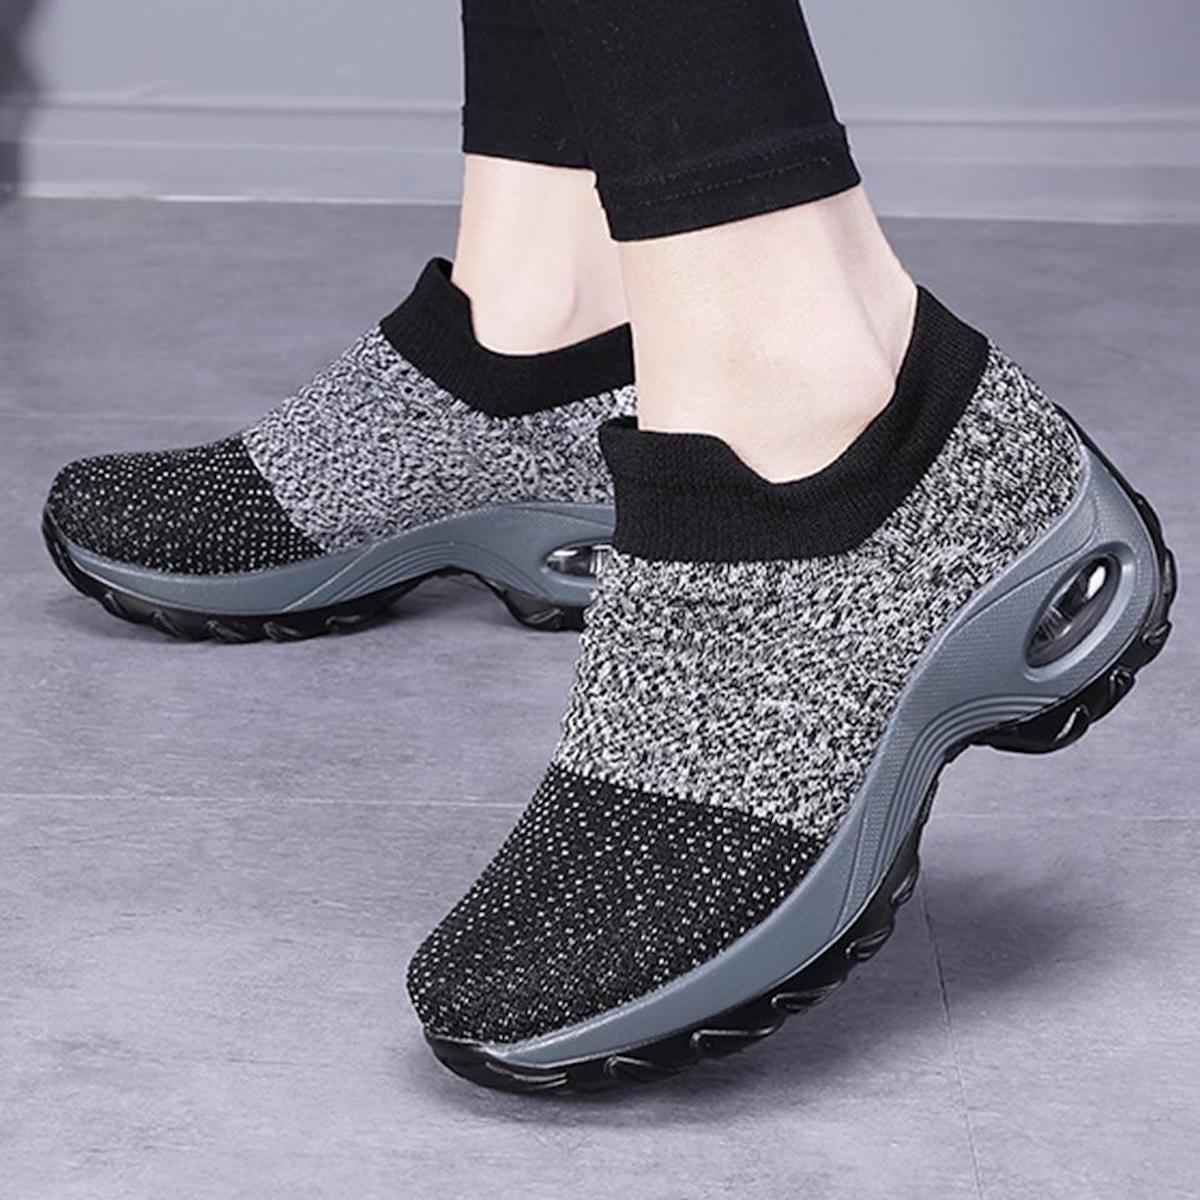 running shoes, other walking shoes, super lightweight, wear resistant, elevated heel, arch support, other shoes, 